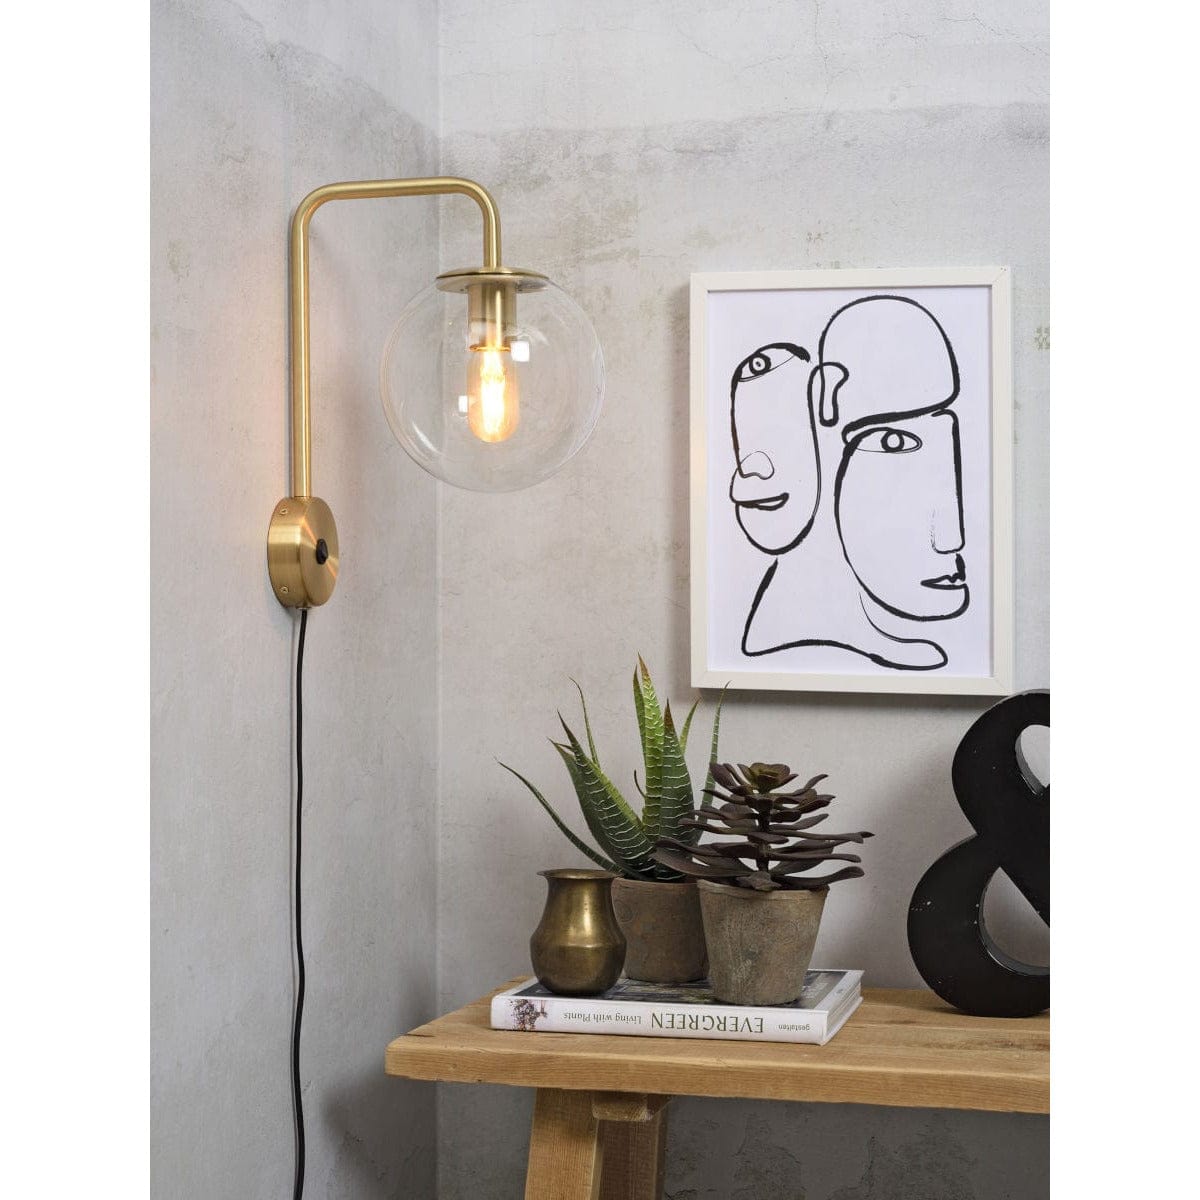 It's About RoMi Wall Lights Gold Warsaw Wall Light Glass Black or Gold